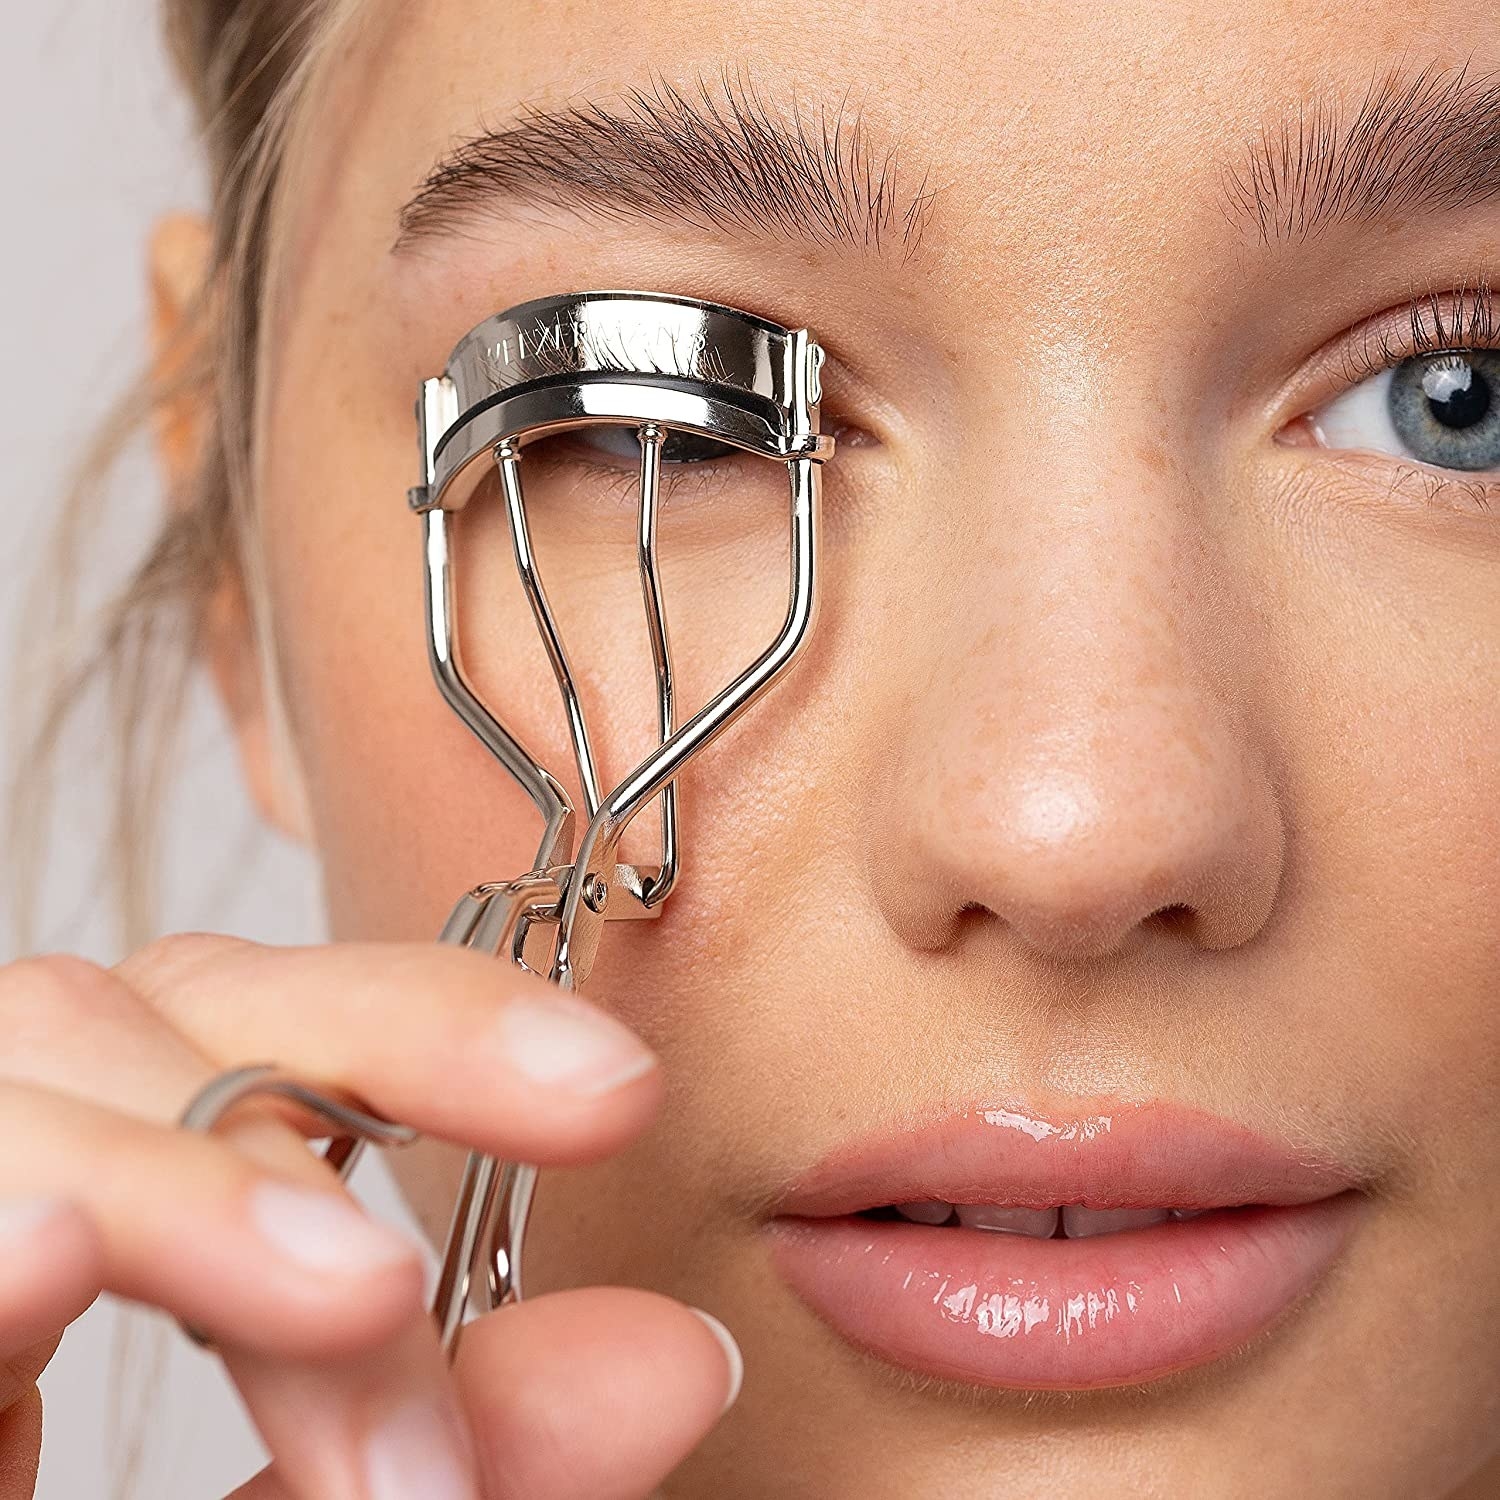 A person curling their eyelashes with an eyelash curler